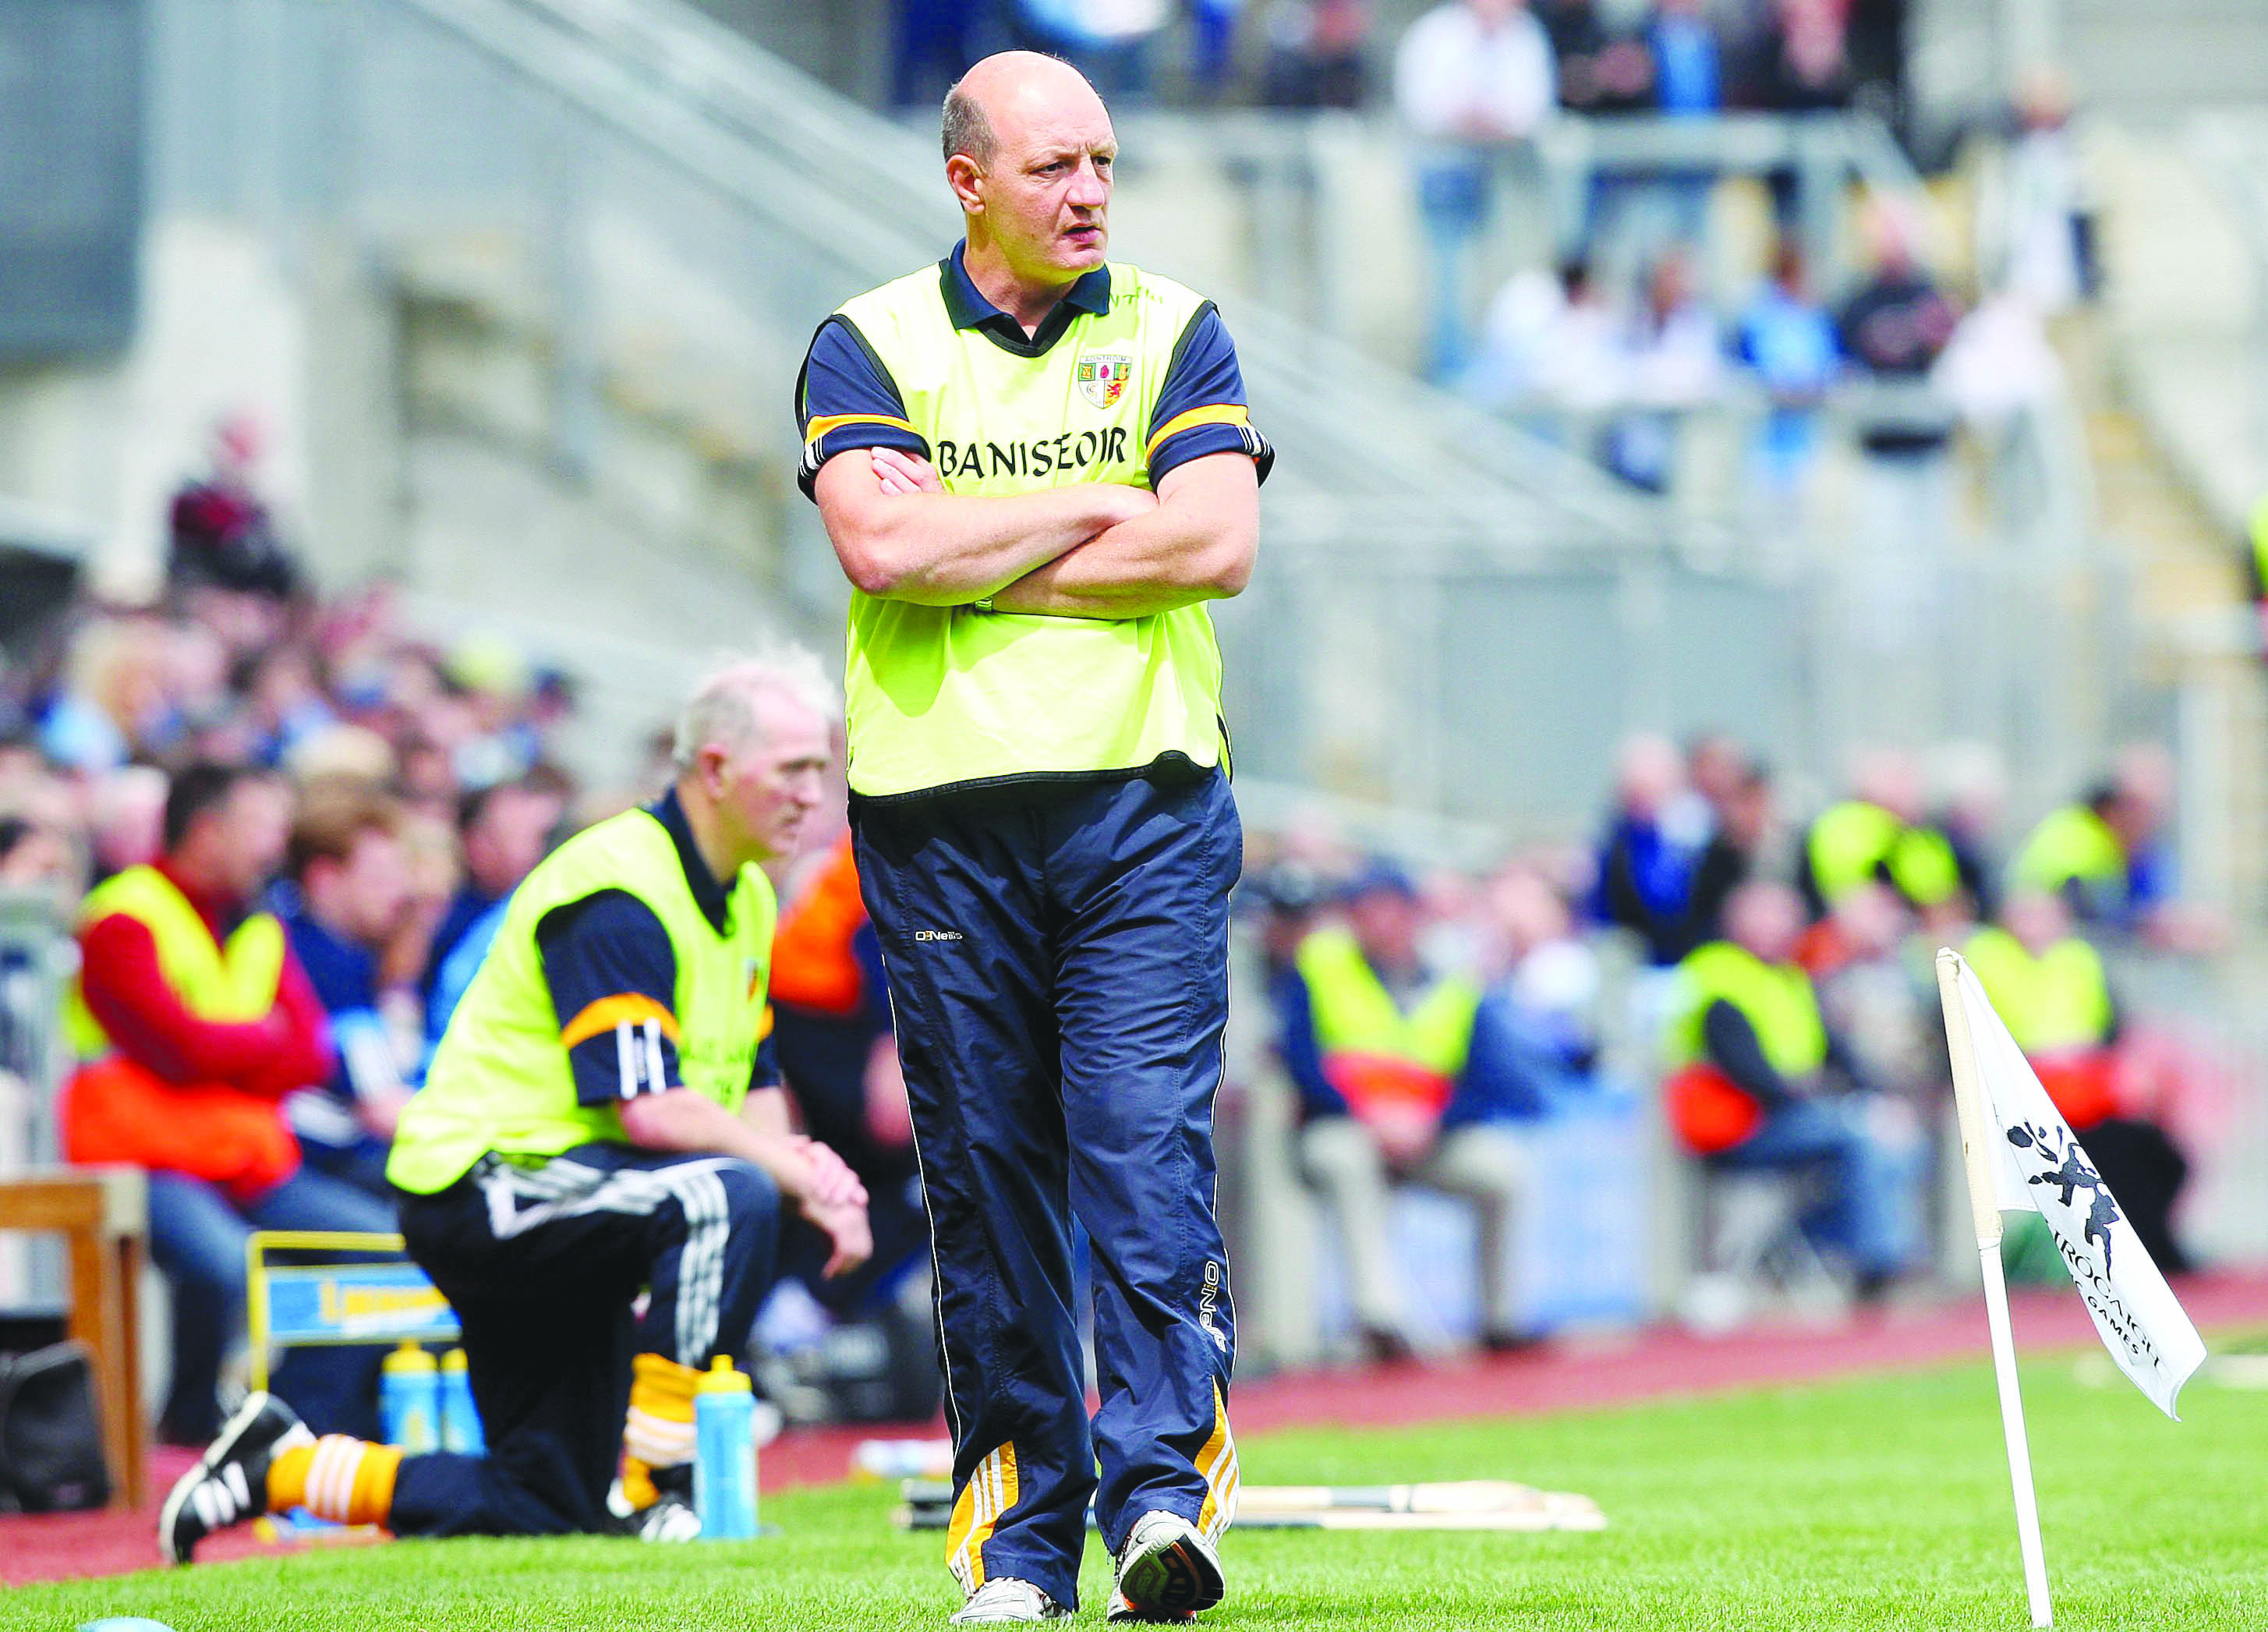 Antrim co-manager Terence ‘Sambo’ McNaughton has called on the Saffrons to restore pride in the jersey ahead of this weekend’s Championship opener against Kildare 